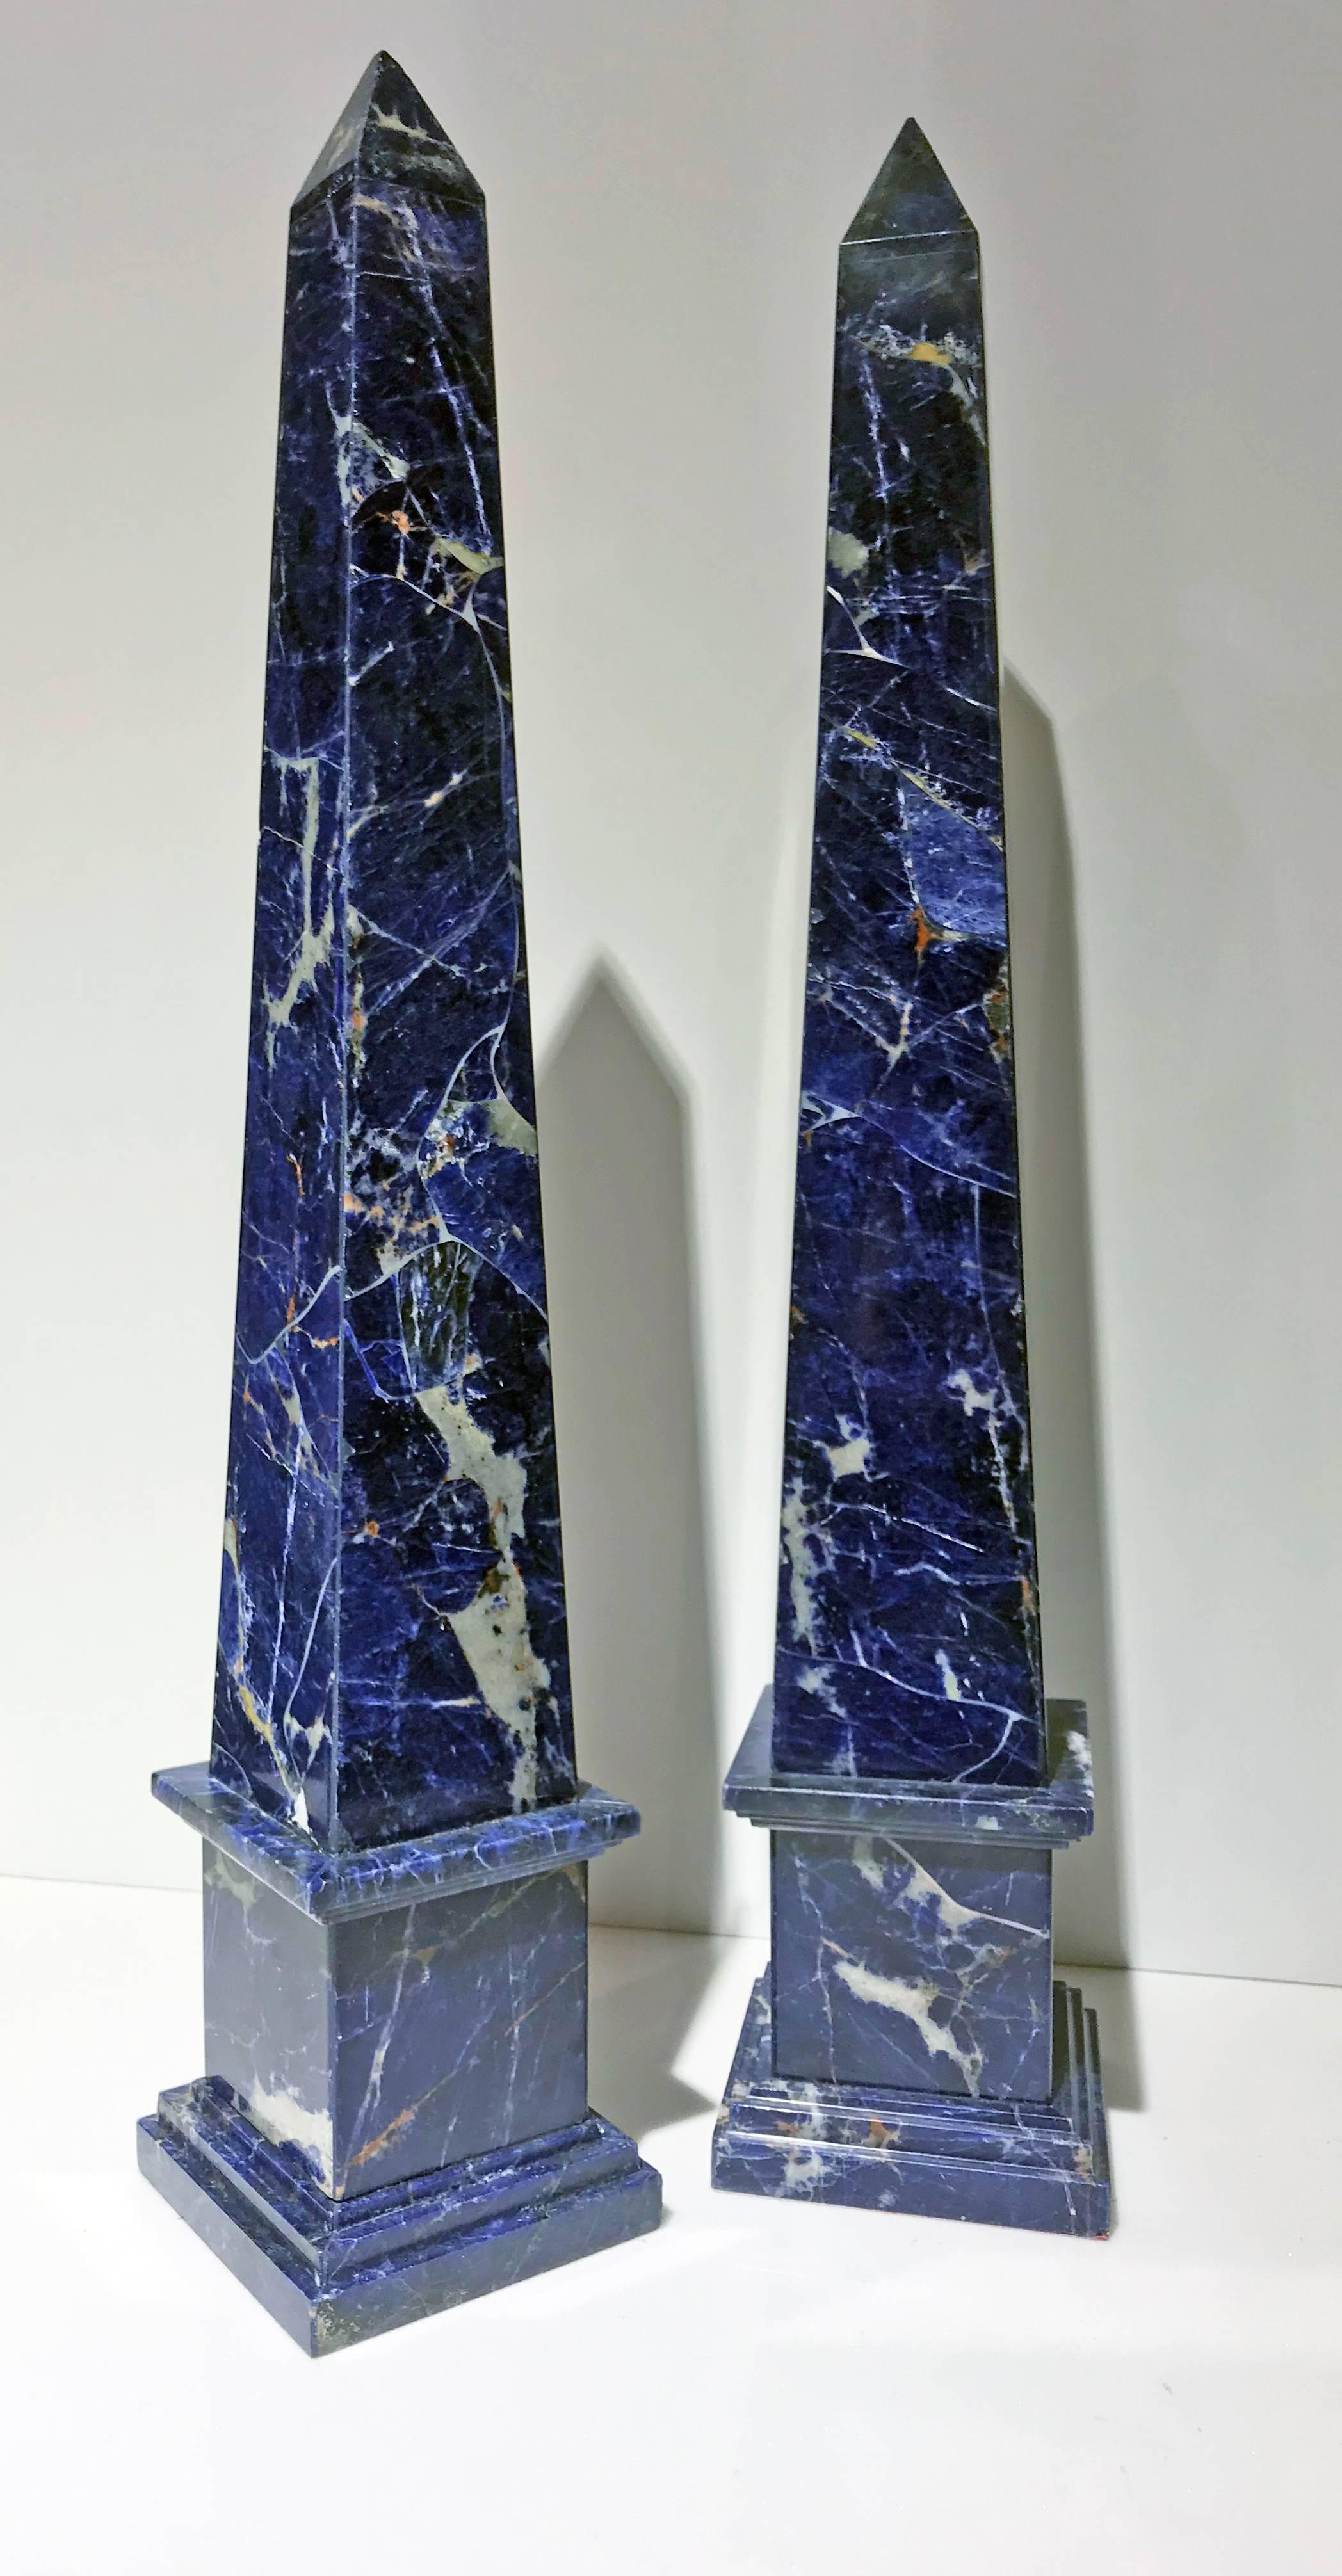 Sodalite is a rich royal blue tectosilicate mineral widely used as an ornamental gemstone. Although massive sodalite samples are opaque, crystals are usually transparent to translucent. Sodalite is a member of the sodalite group with hauyne, nosean,